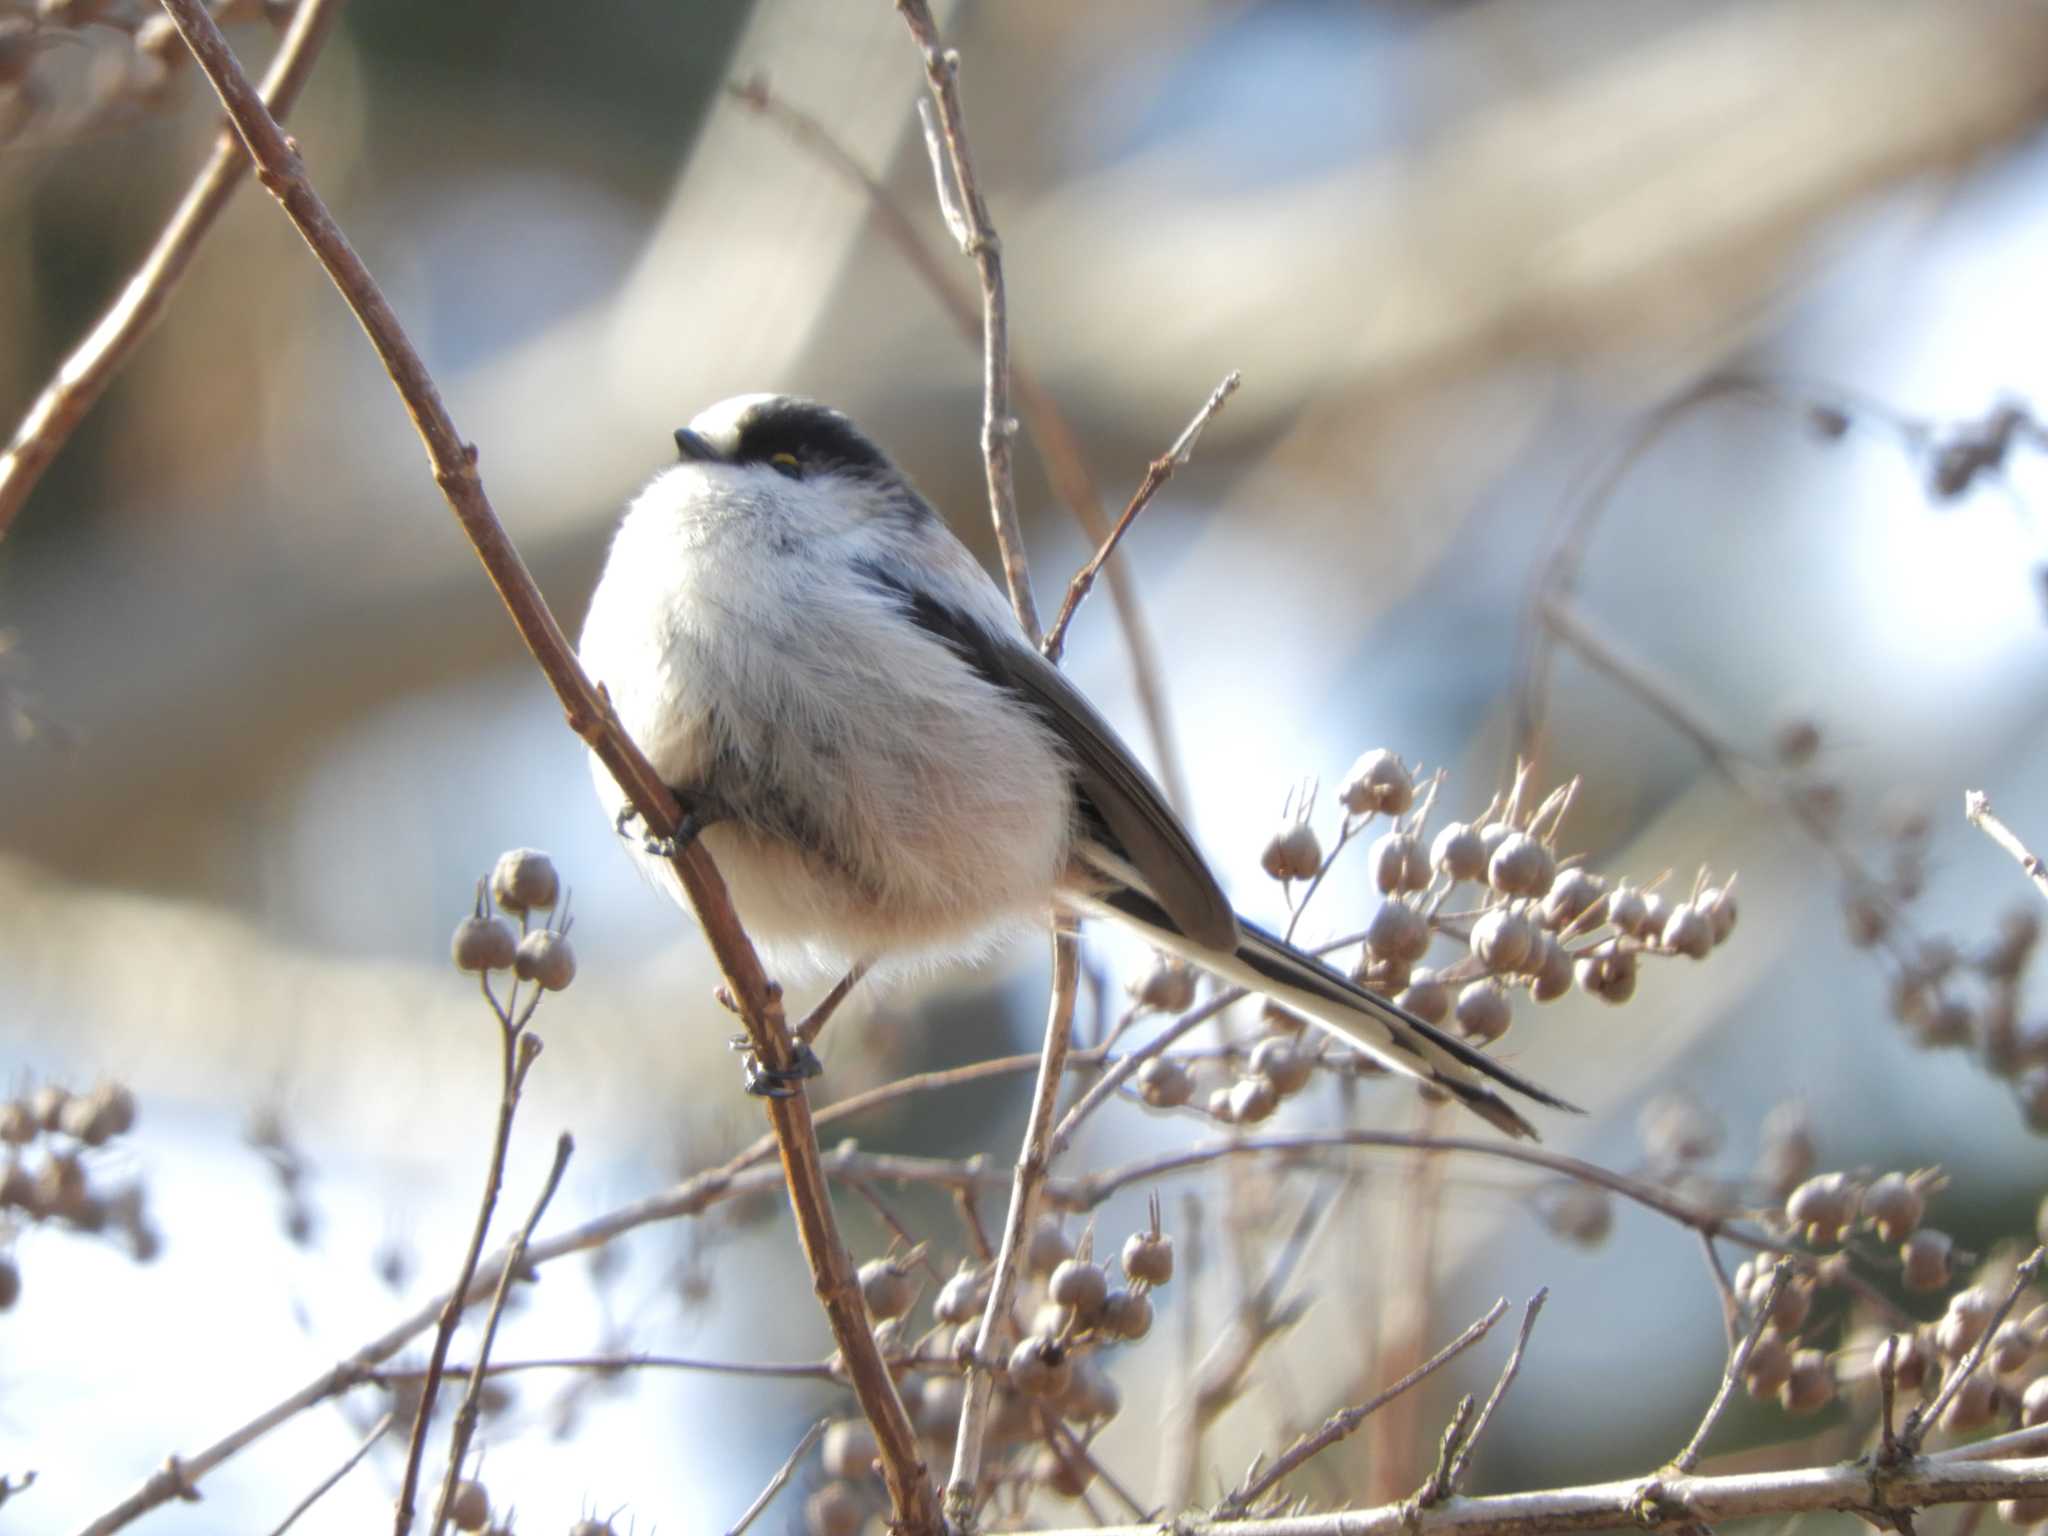 Photo of Long-tailed Tit at Imperial Palace by maru